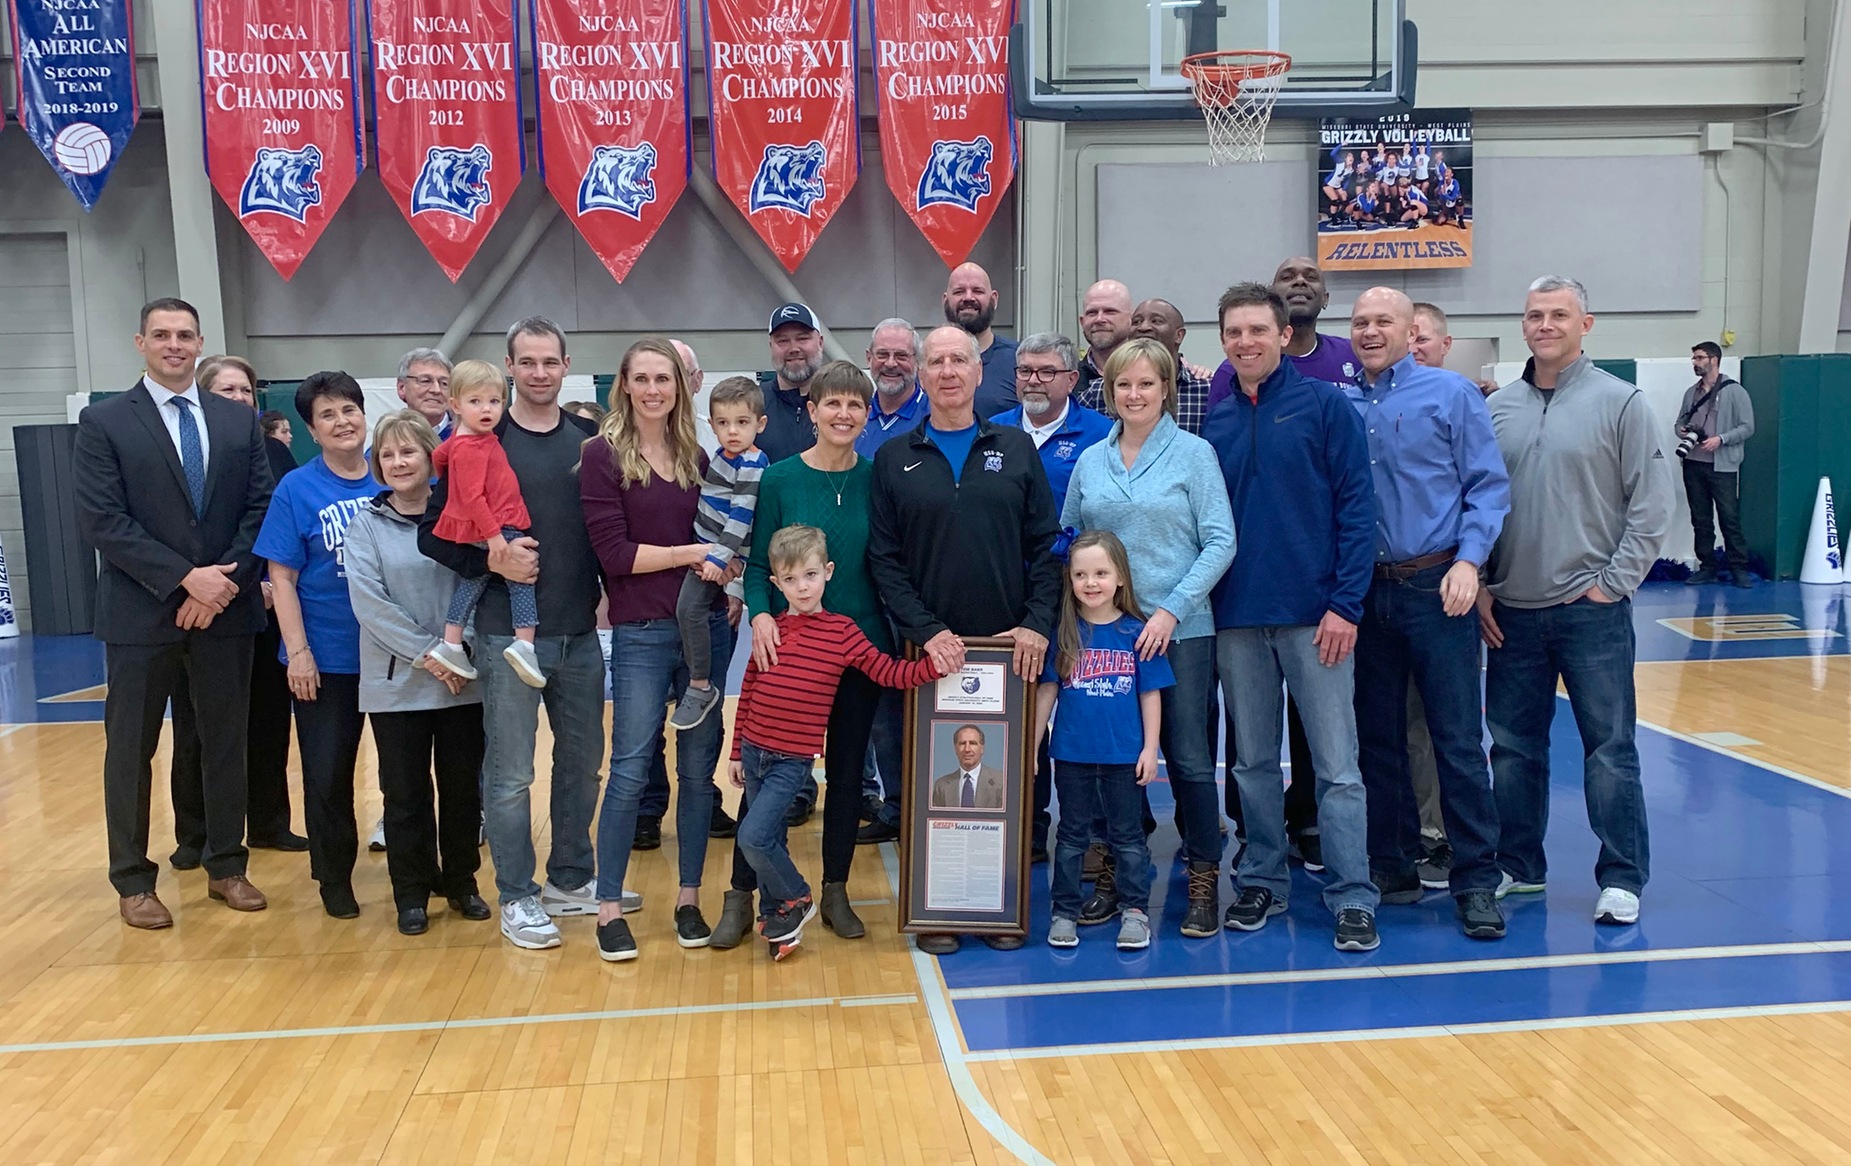 Former Grizzly Basketball Head Coach Tom Barr was inducted into the Grizzly Athletics Hall of Fame Jan. 18 during halftime of the Grizzly Basketball game against Three Rivers College. Celebrating on the court with Barr were, in no particular order, his wife, Kathy, son and daughter-in-law Jared and Leslie Barr; daughter and son-in-law Kerensa and Luke Cassis; grandchildren Mia Barr and Leo, Jett and Chaney Cassis; current Grizzly Basketball Head Coach Chris Popp; Grizzly Booster Club members Carolyn Smith, Donna Frey, Ron Shemwell, John Williams, Russ Gant, John Kenslow, and Frank Mydler; Missouri State-West Plains Chancellor Shirley Lawler; and Barr’s former Grizzlies Donovan Brown, Jason Robbins, Blake Reese, Anthony Perry, Darren Hinshaw, Chuck Campbell, Eric Judd and Daniel Naranich. (Missouri State-West Plains Photo)